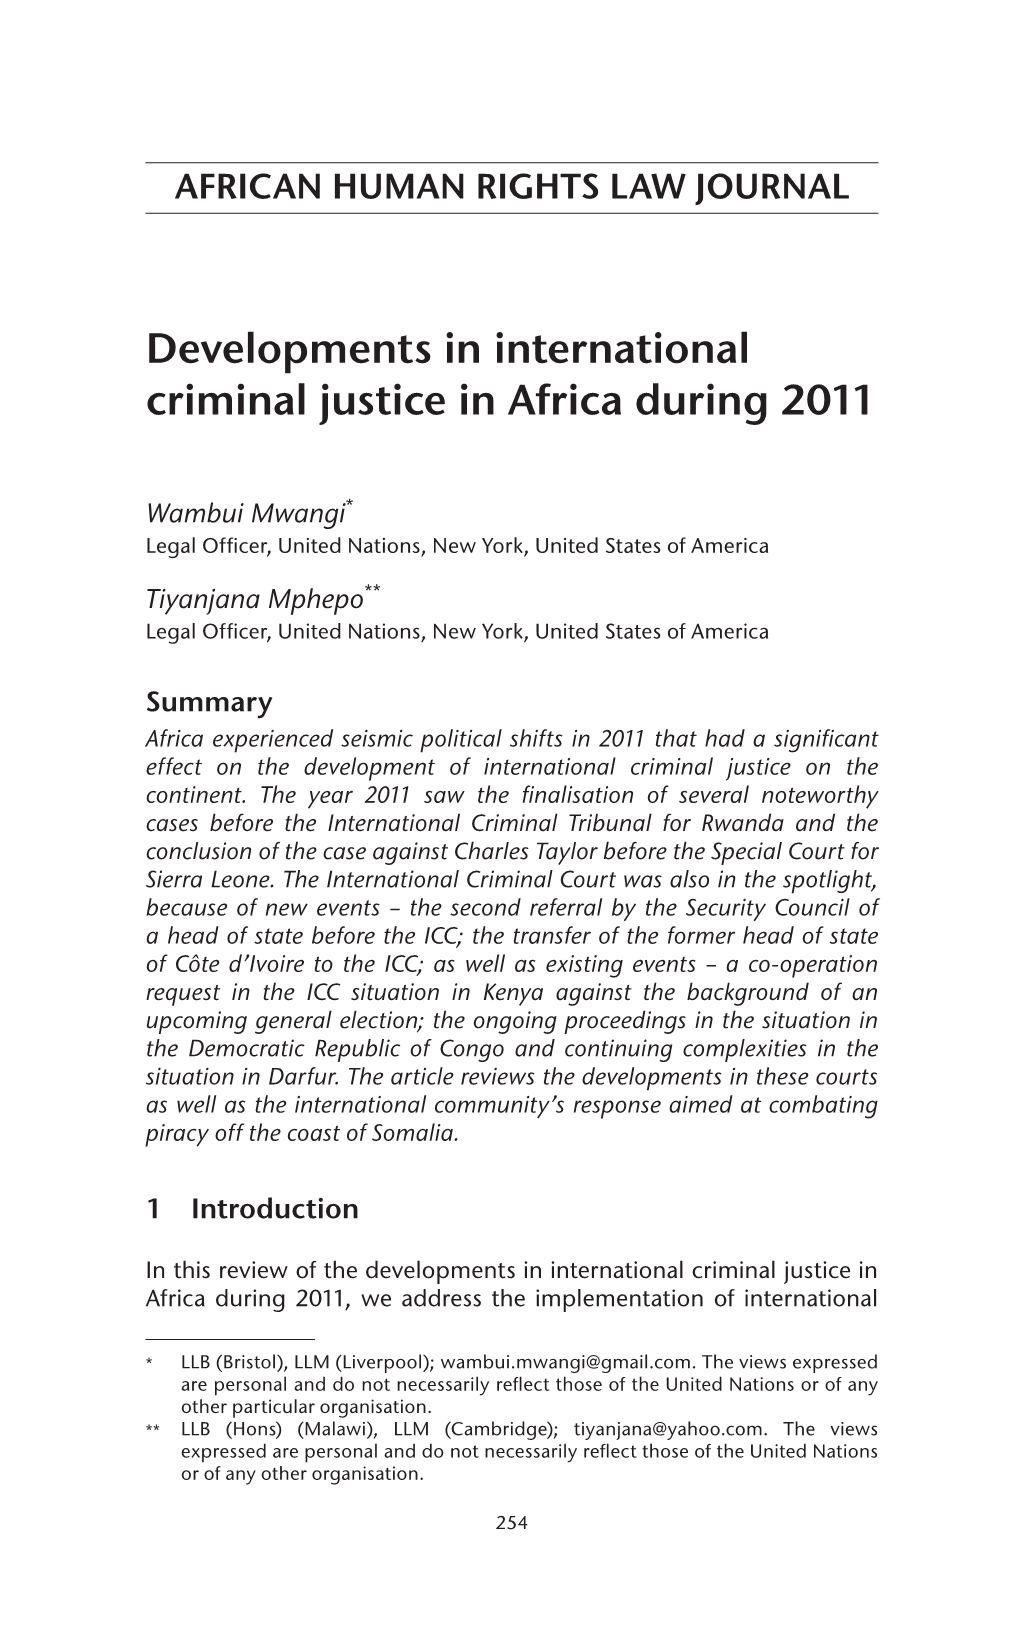 Developments in International Criminal Justice in Africa During 2011